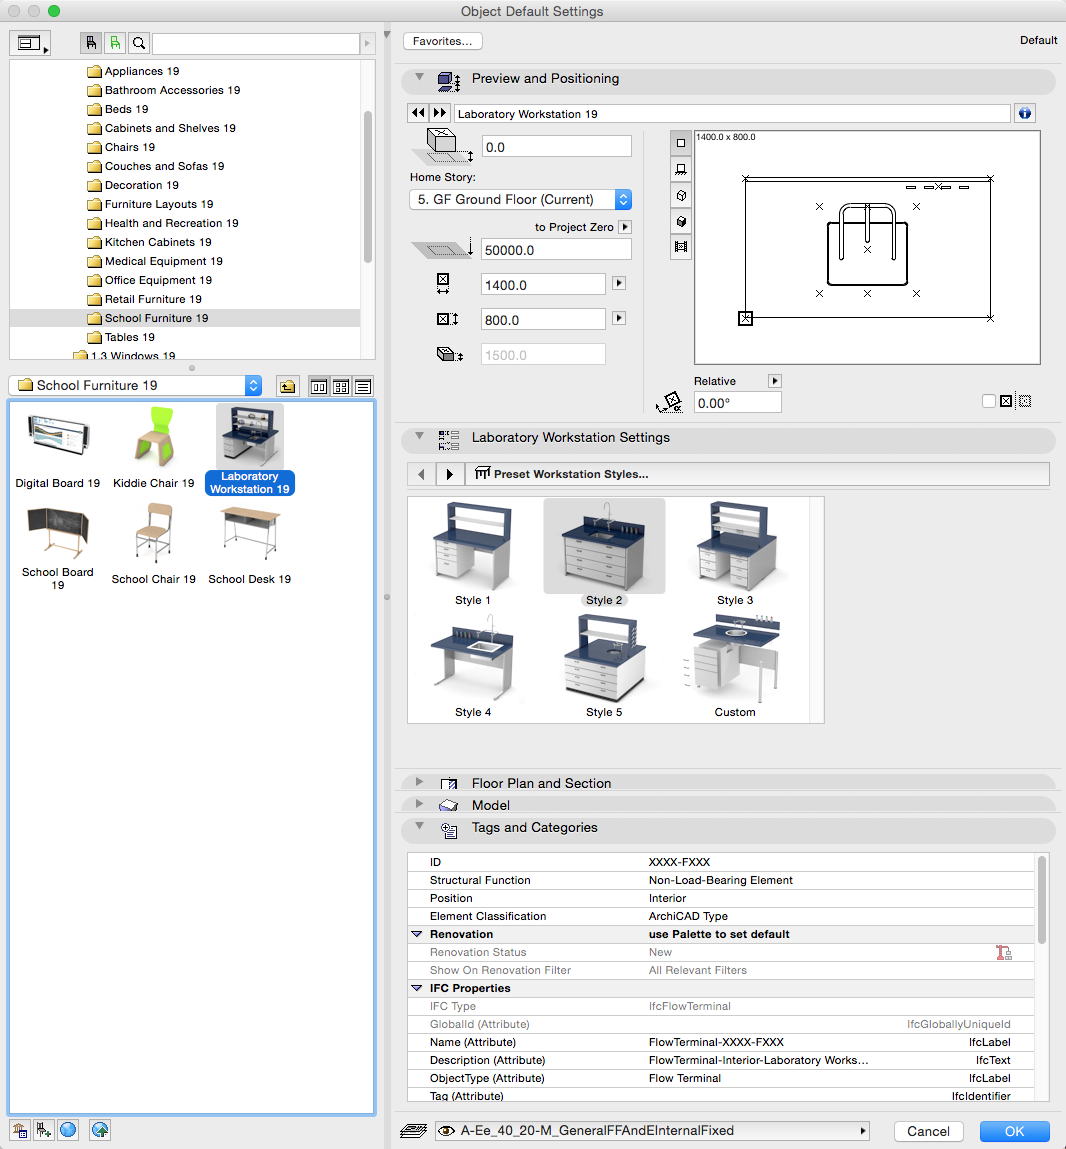 archicad 9 download full